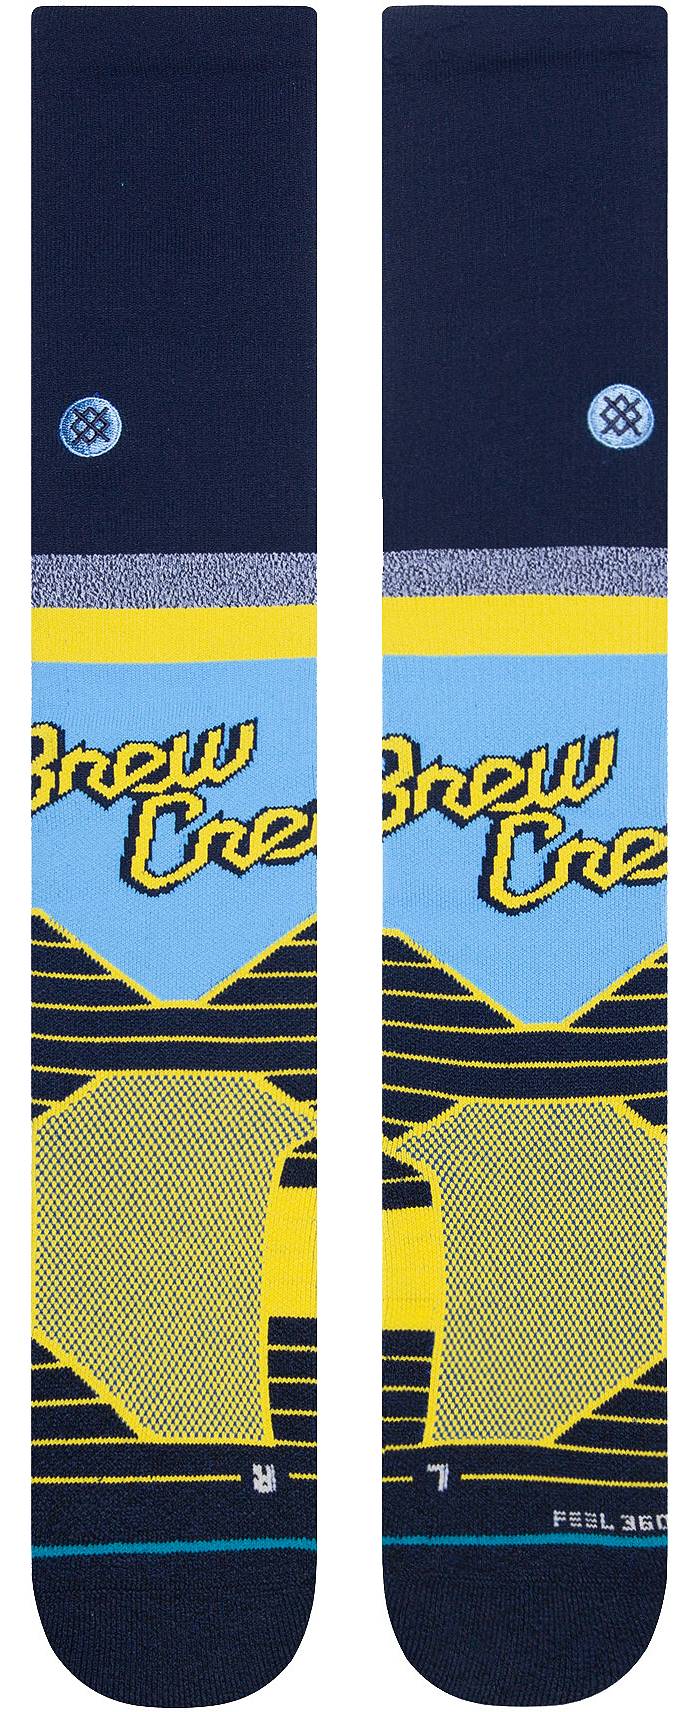 Officially Licensed MLB Stance 2022 City Connect Crew Socks - Brewers